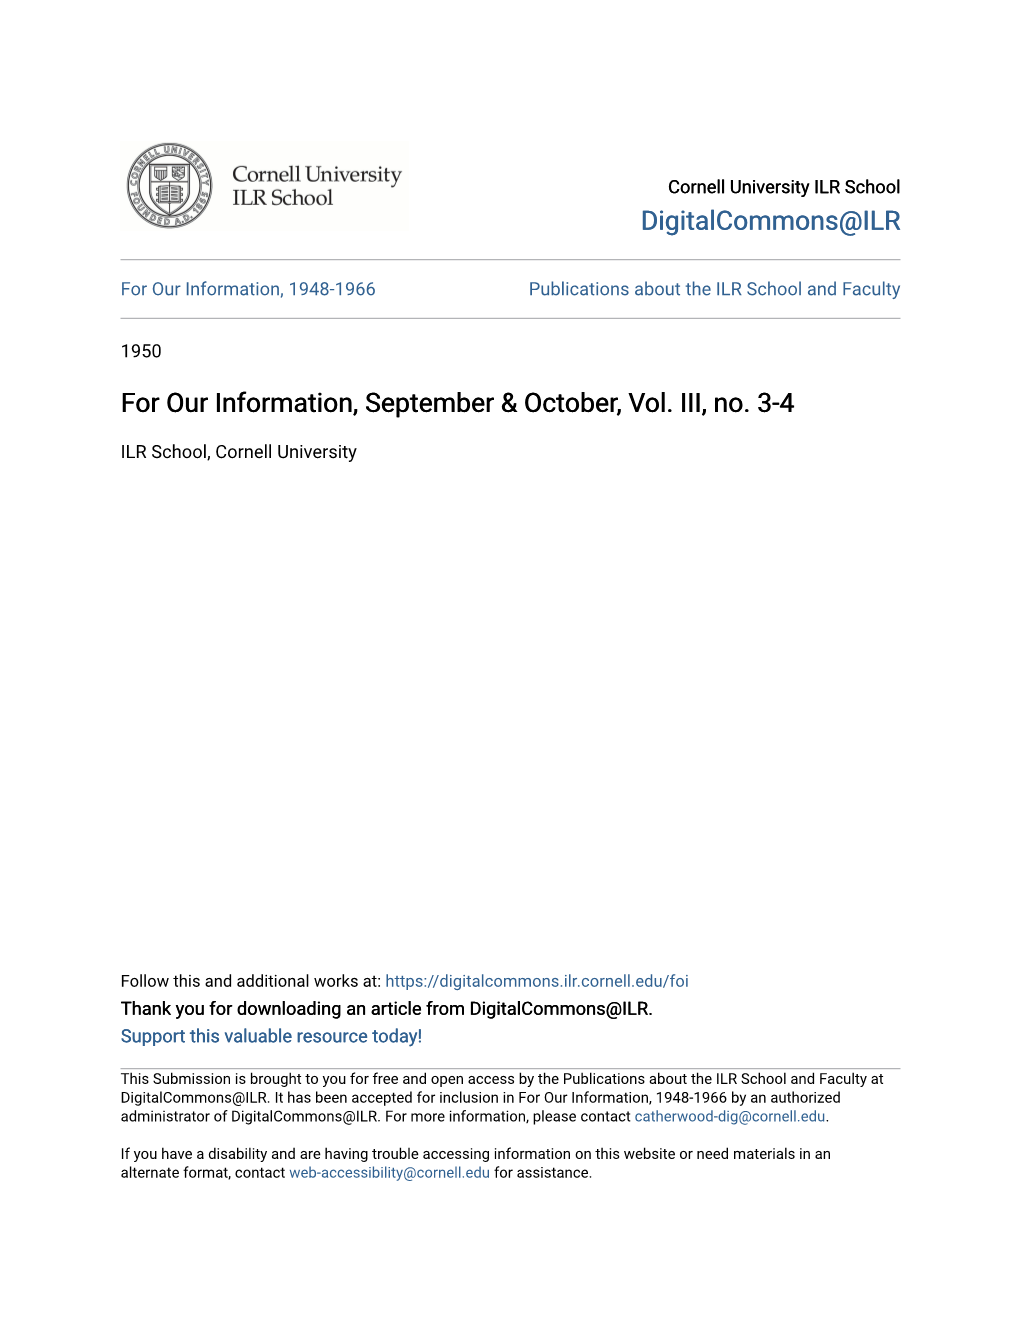 For Our Information, September & October, Vol. III, No